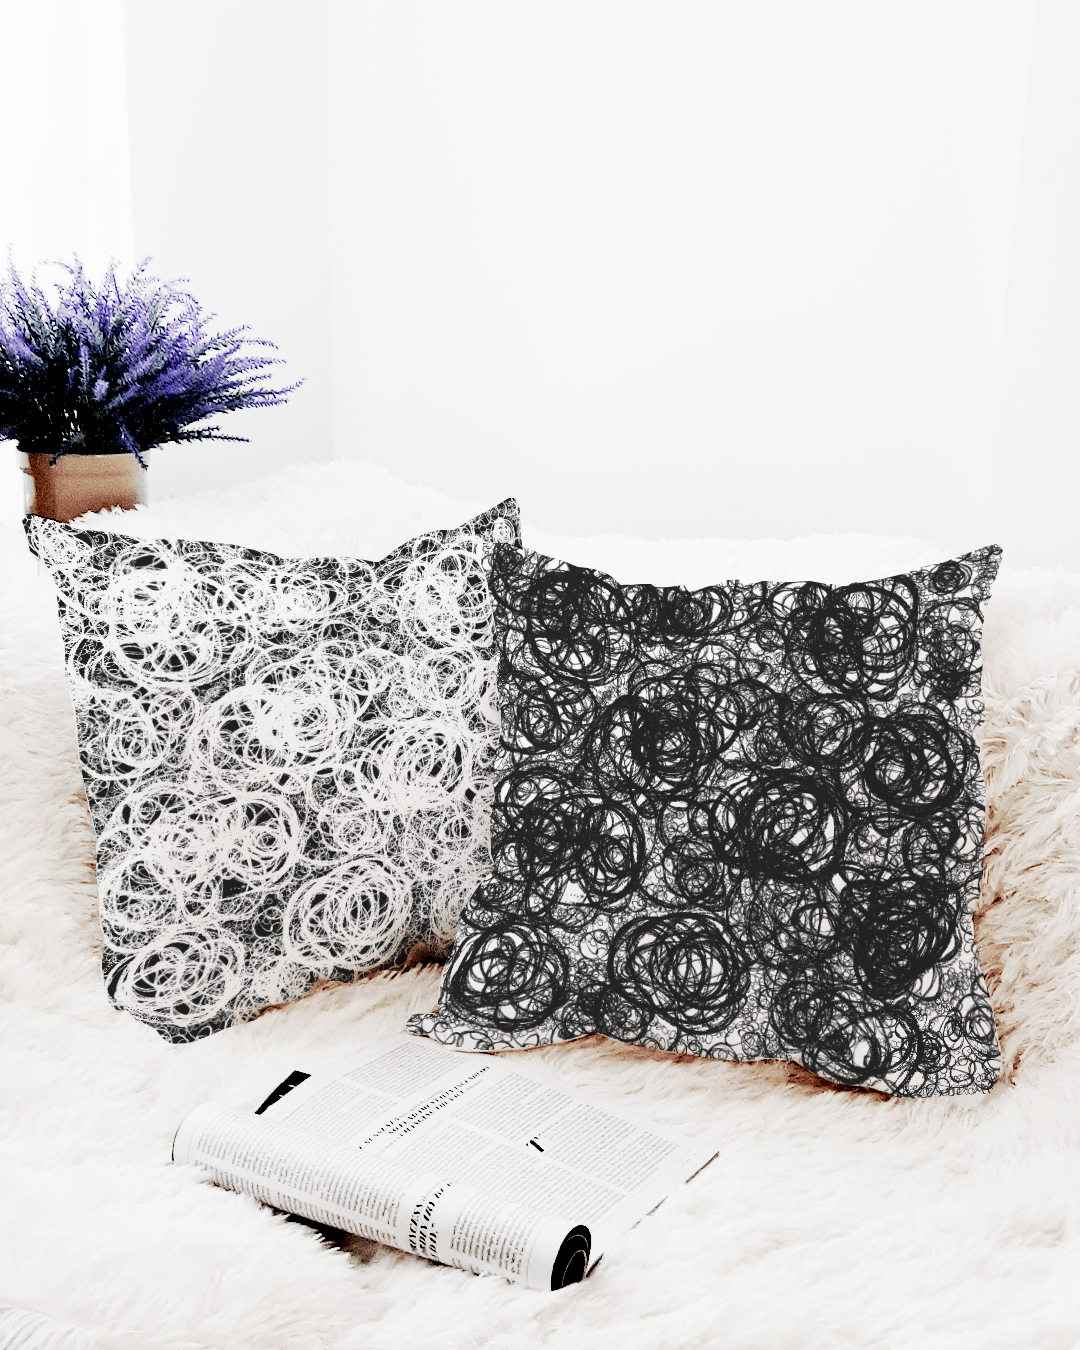 Shop Cherise Abstract Scribble Art Decorative Throw Pillow Accent Cushion - White, Pillow, USA Boutique